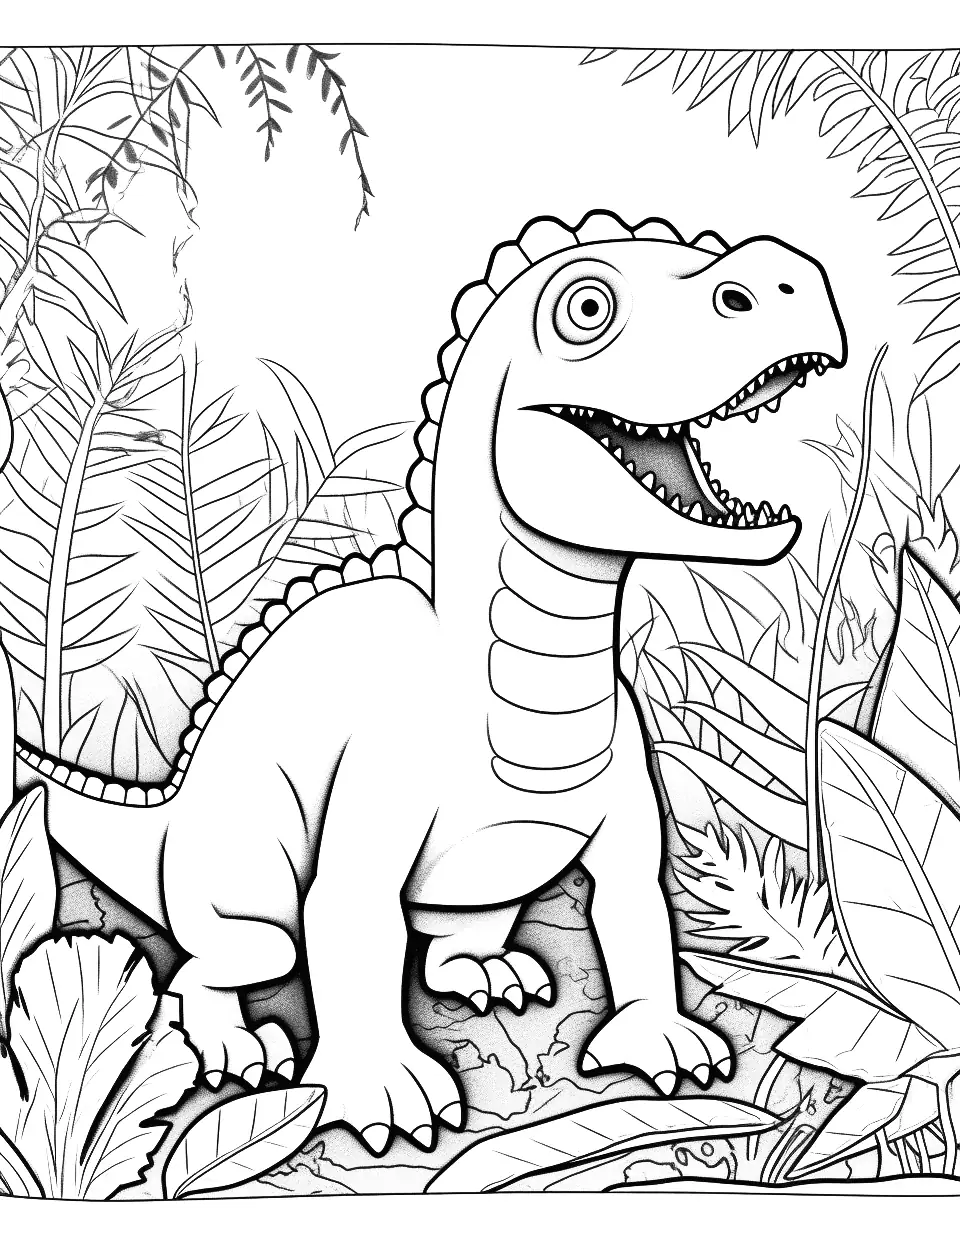 Indoraptor in the Jungle Coloring Page - A menacing scene with the Indoraptor lurking in the jungle.